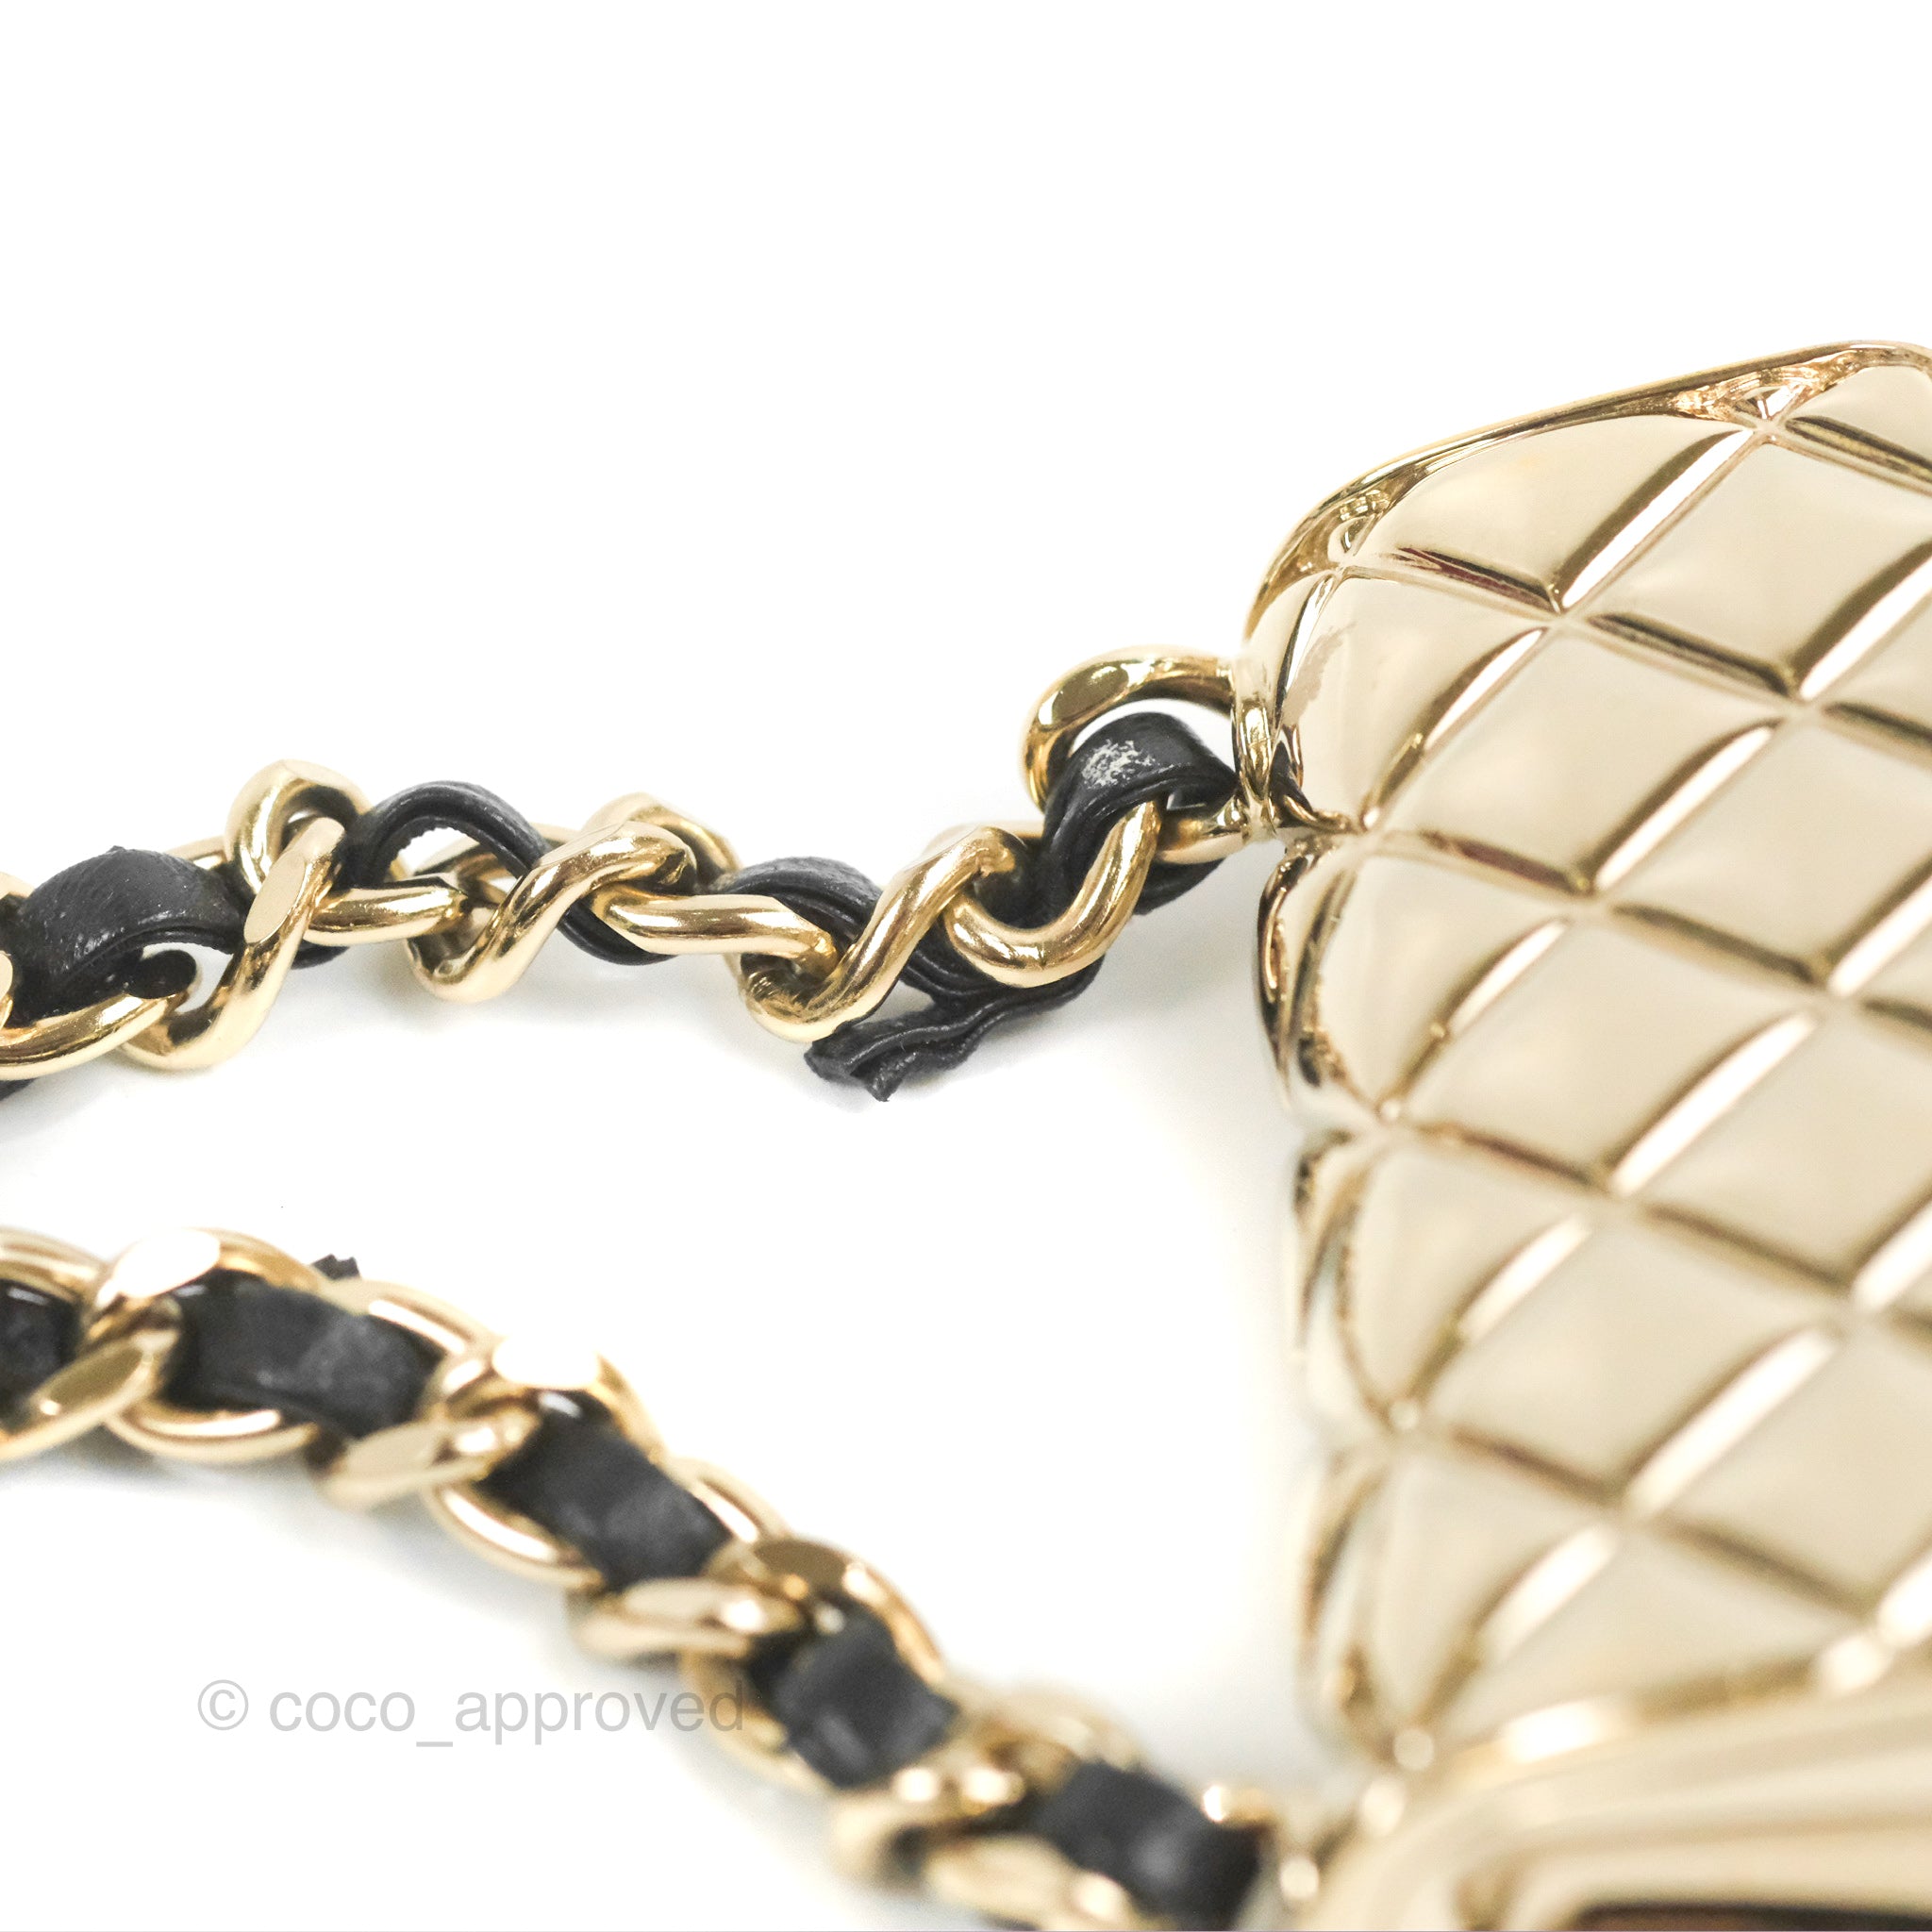 CHANEL Gold Metal Quilted Flap Bag Charm Chain Link Necklace